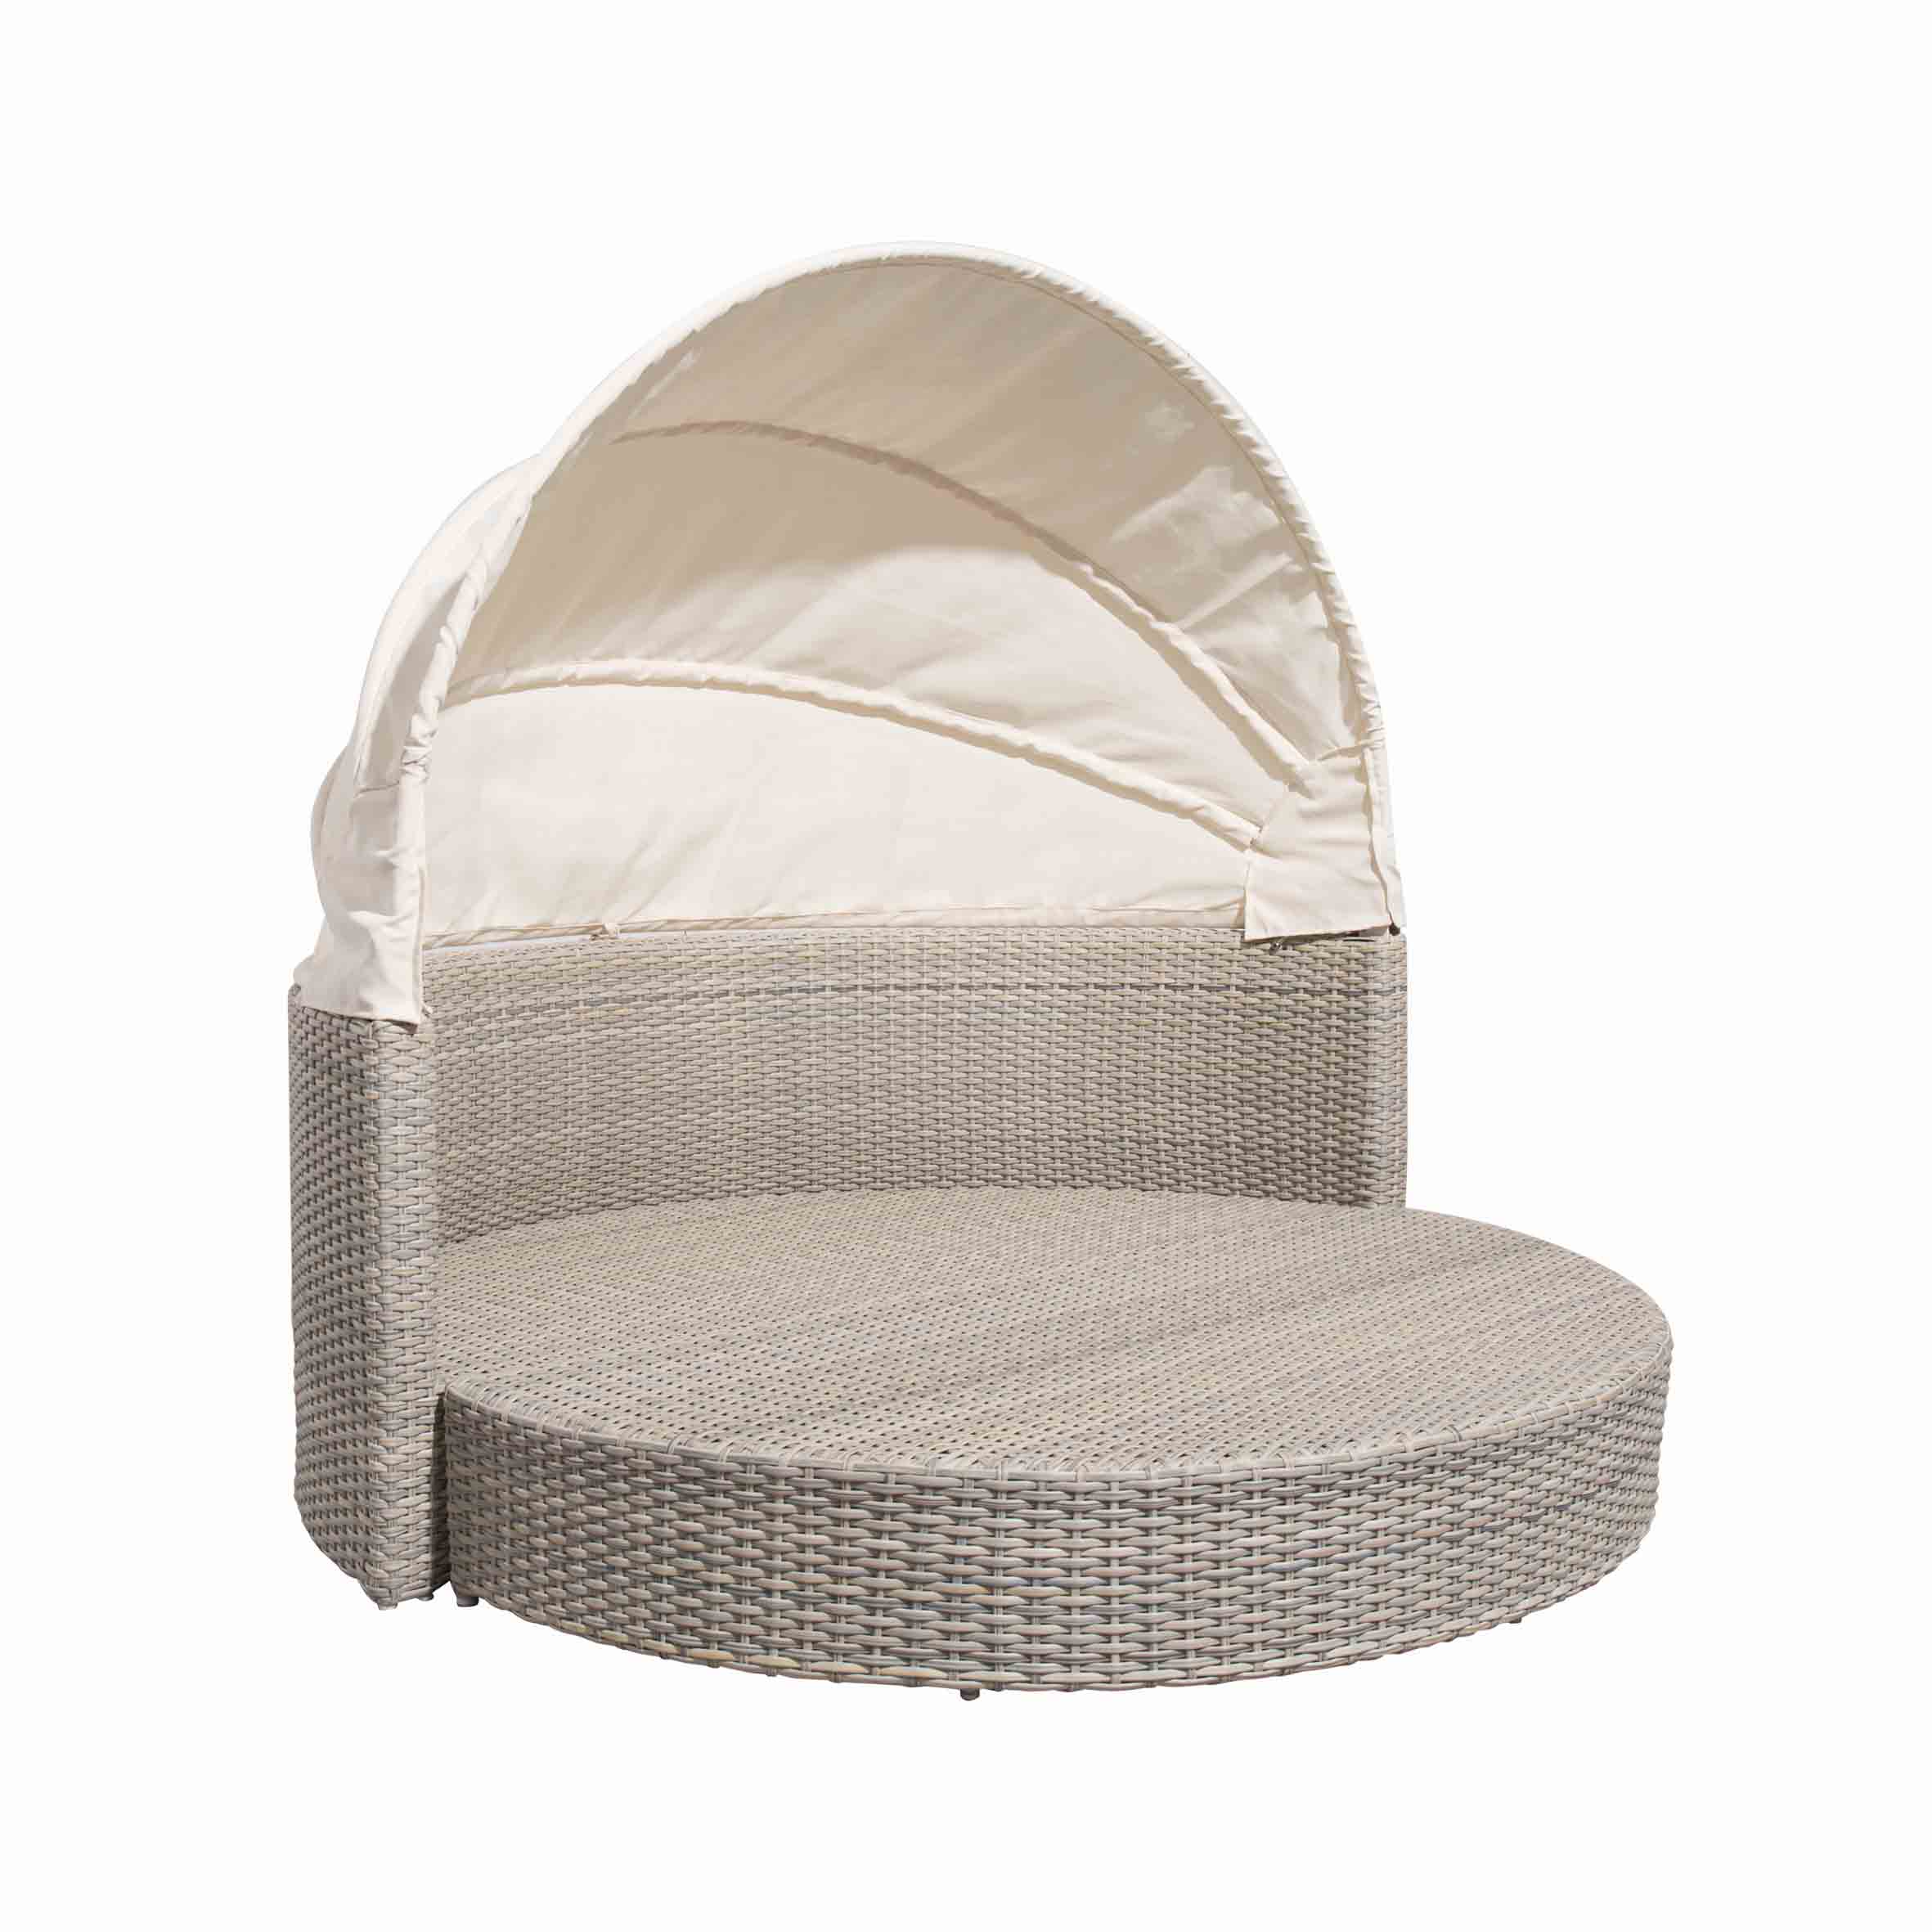 Ideal rattan round daybed S4